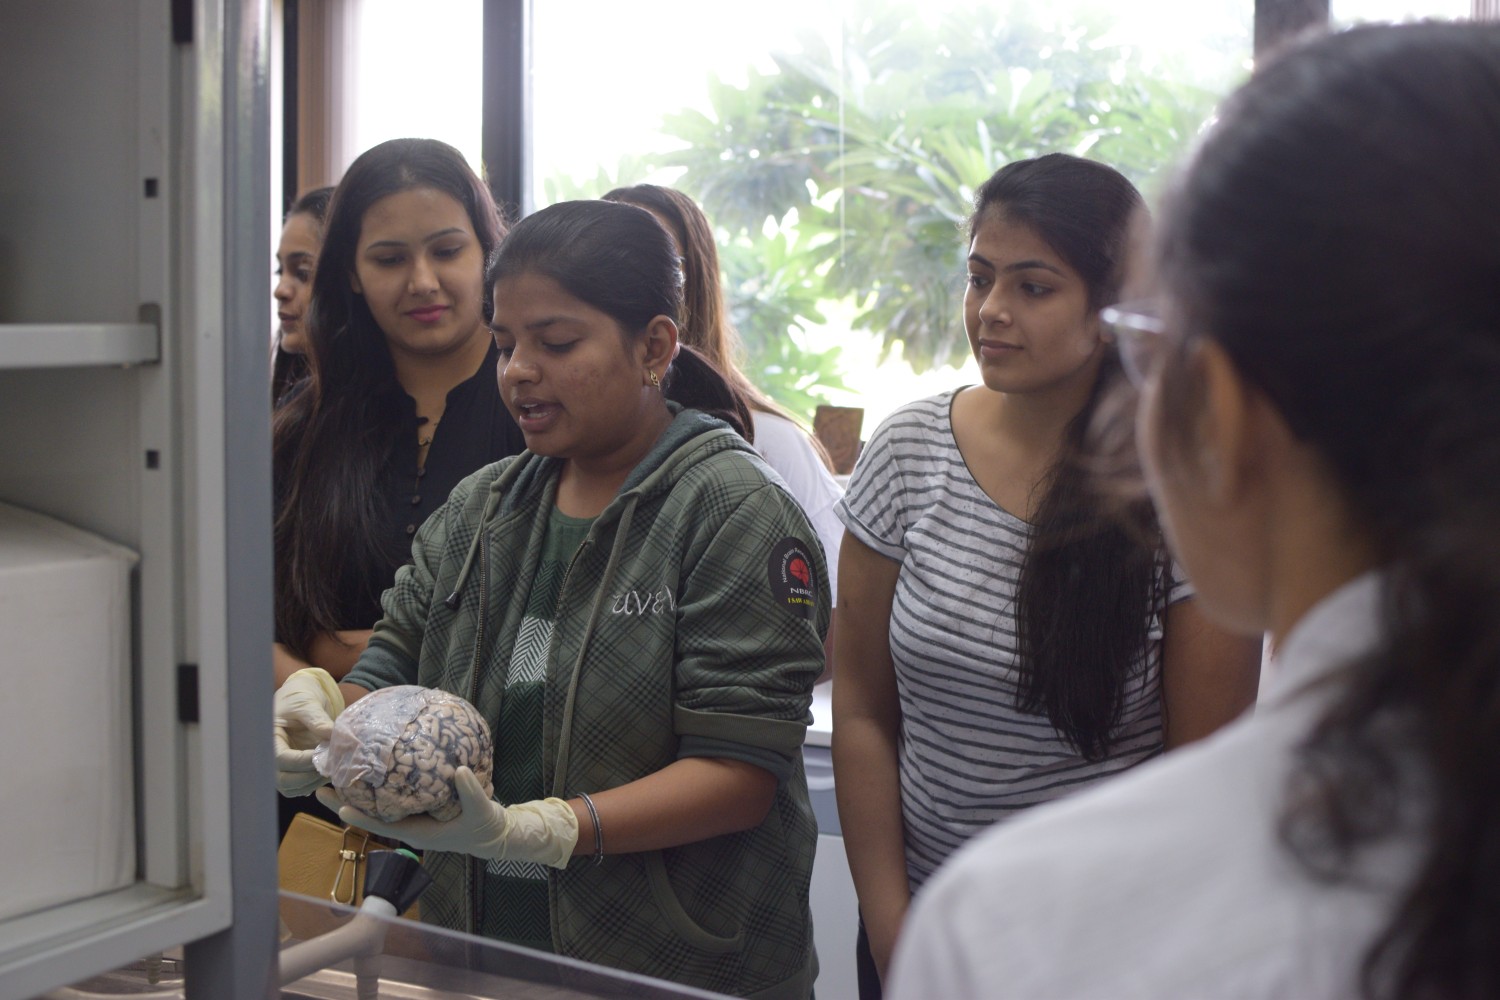 Scientists Unravel Mysteries of Human Brain in an Open Day to Lay Public